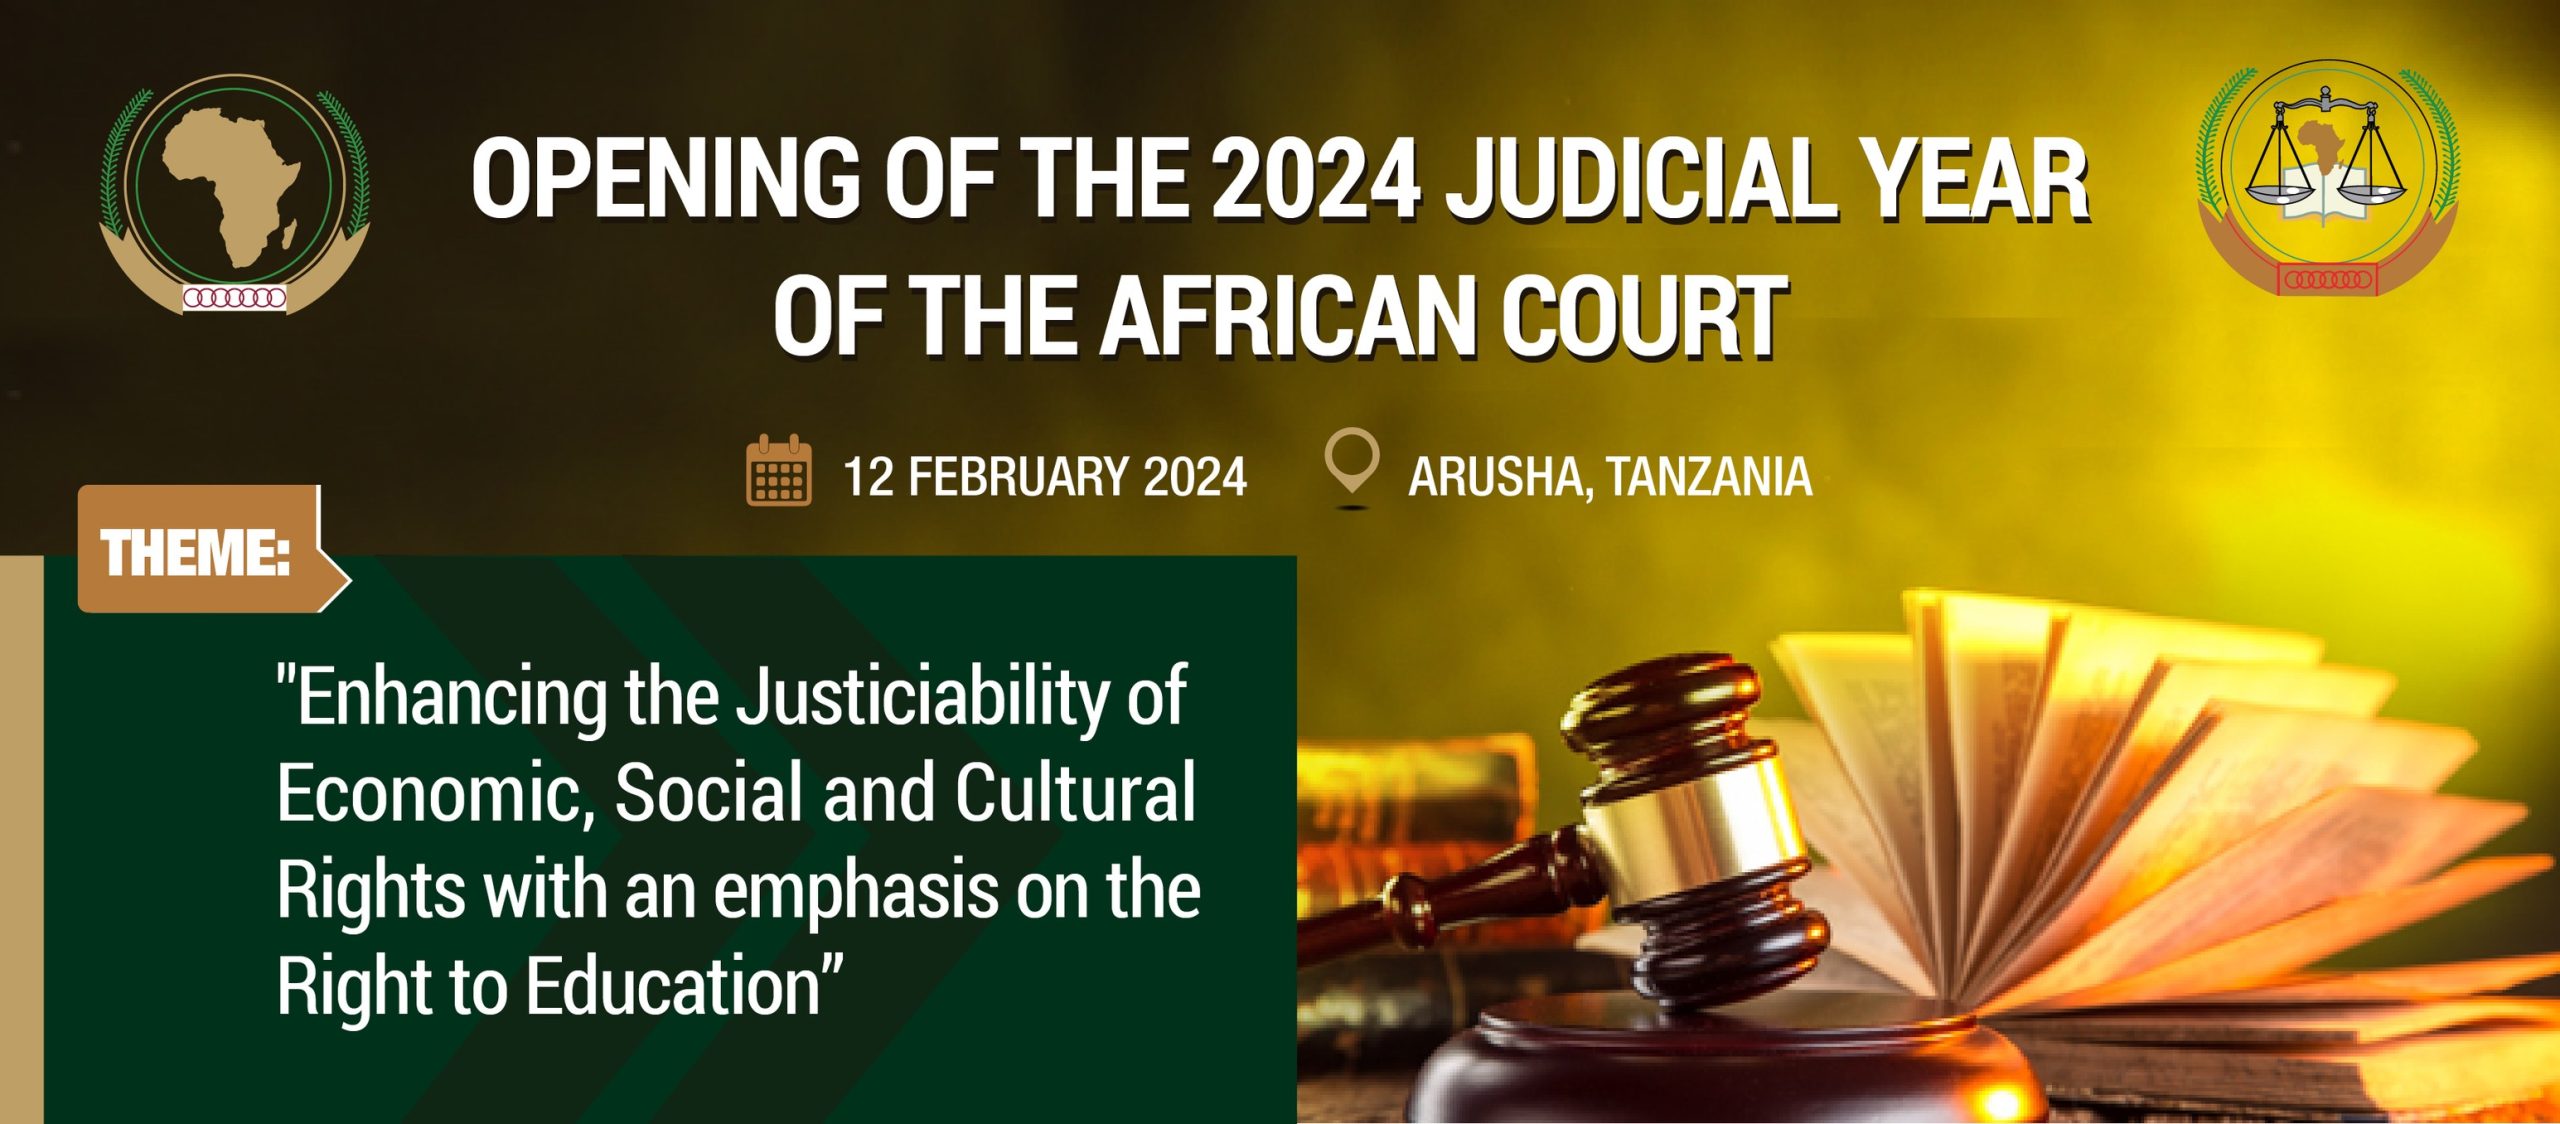 OPENING OF THE 2024 JUDICIAL YEAR AND DELIVERY OF JUDGEMENTS AT THE 72nd ORDINARY SESSION OF THE AFRICAN COURT: 12 & 13 FEBRUARY 2024